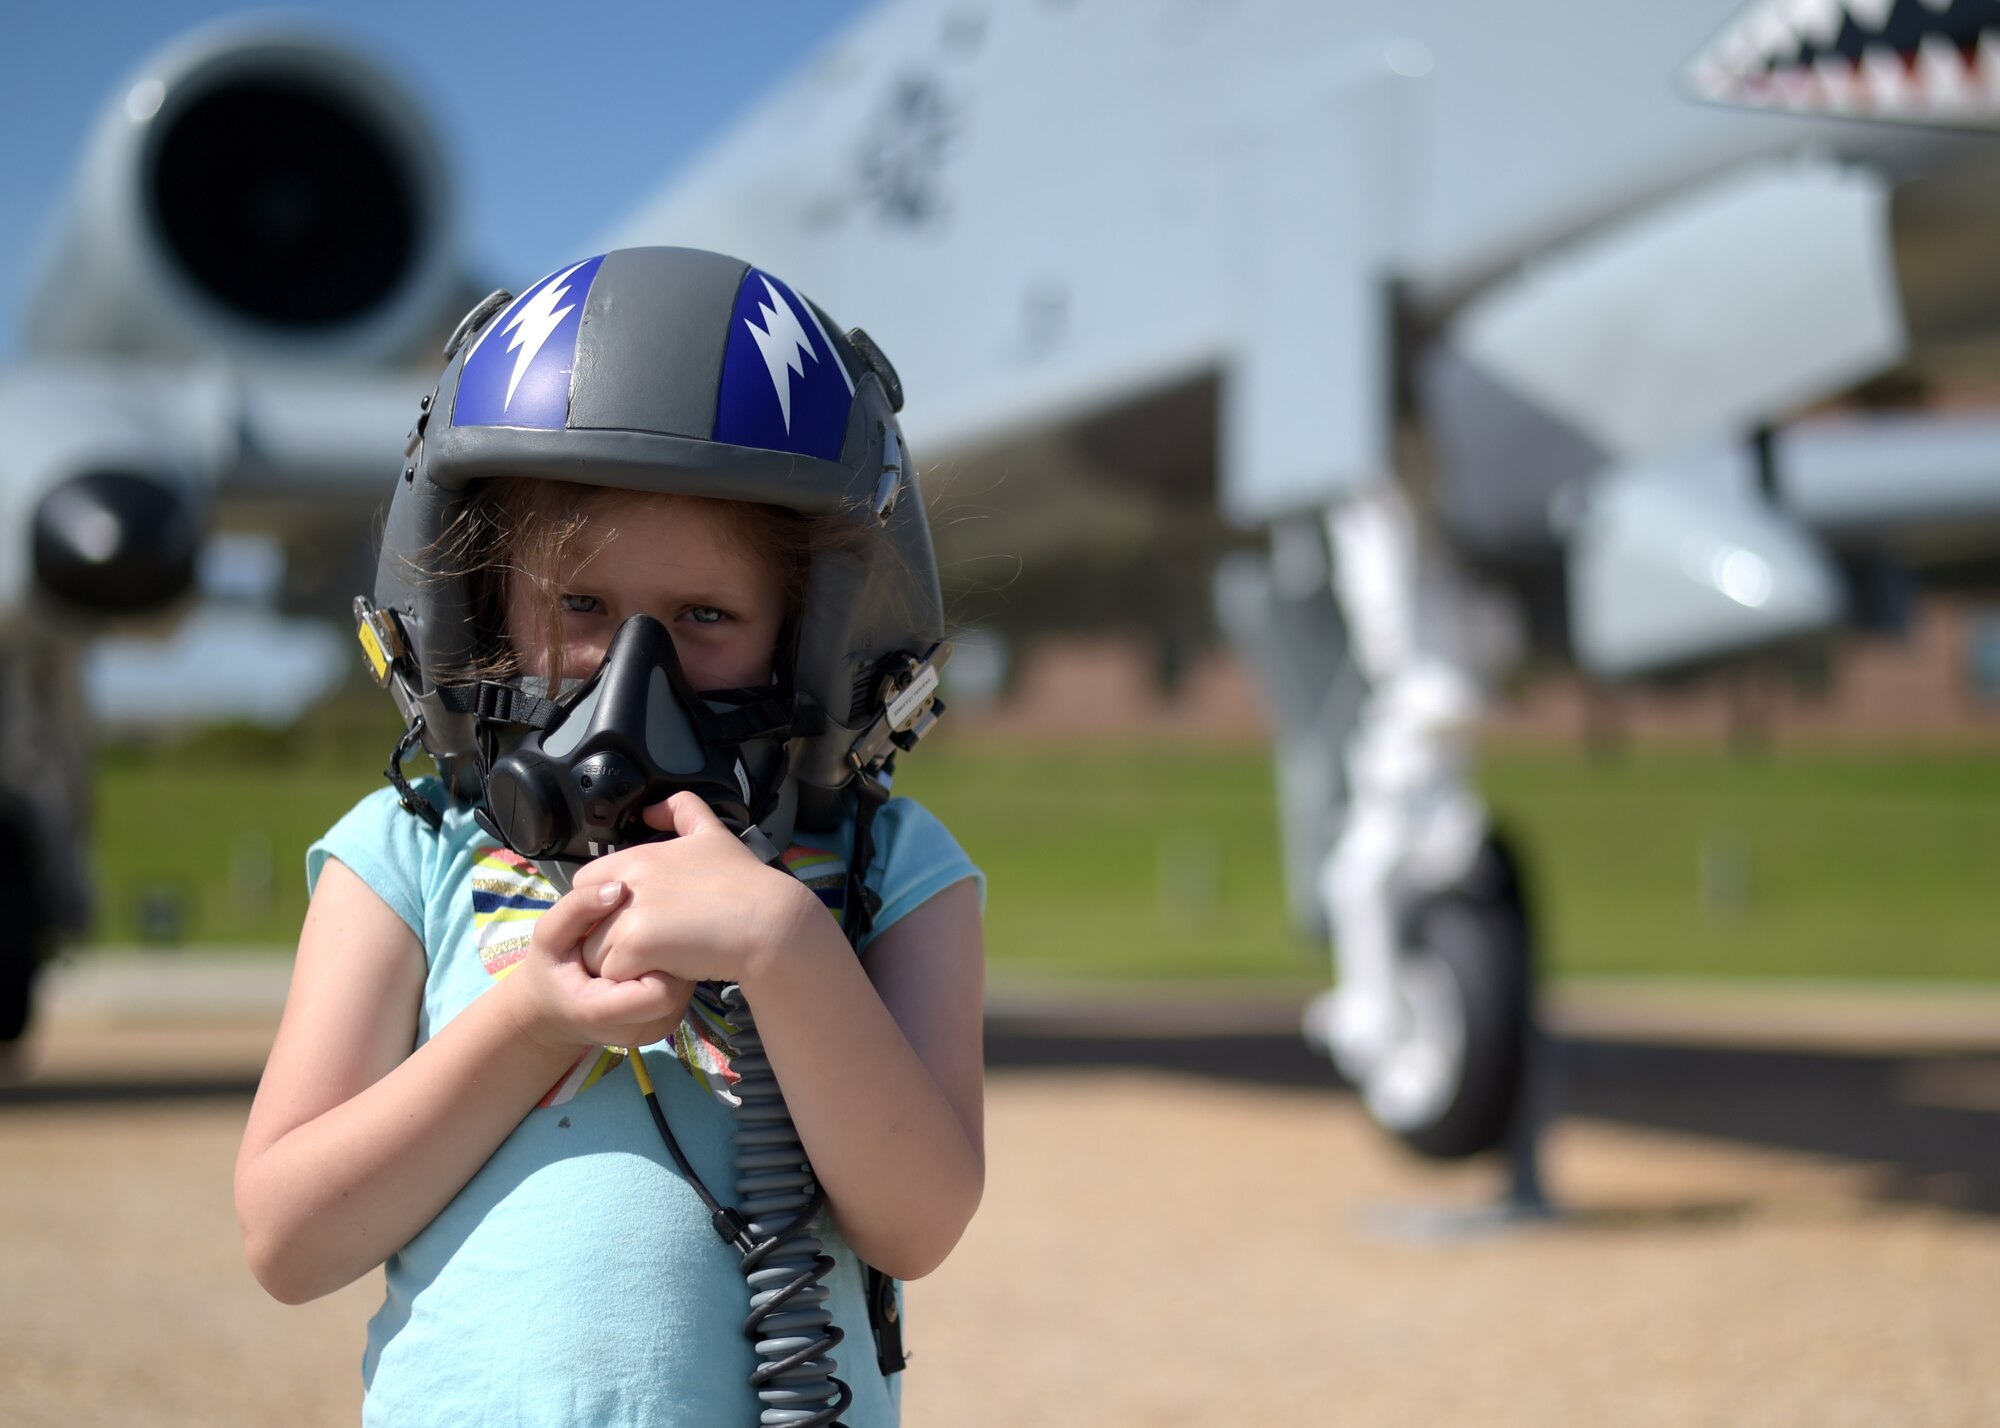 Girl in helmet in front of A-10 attack aircraft